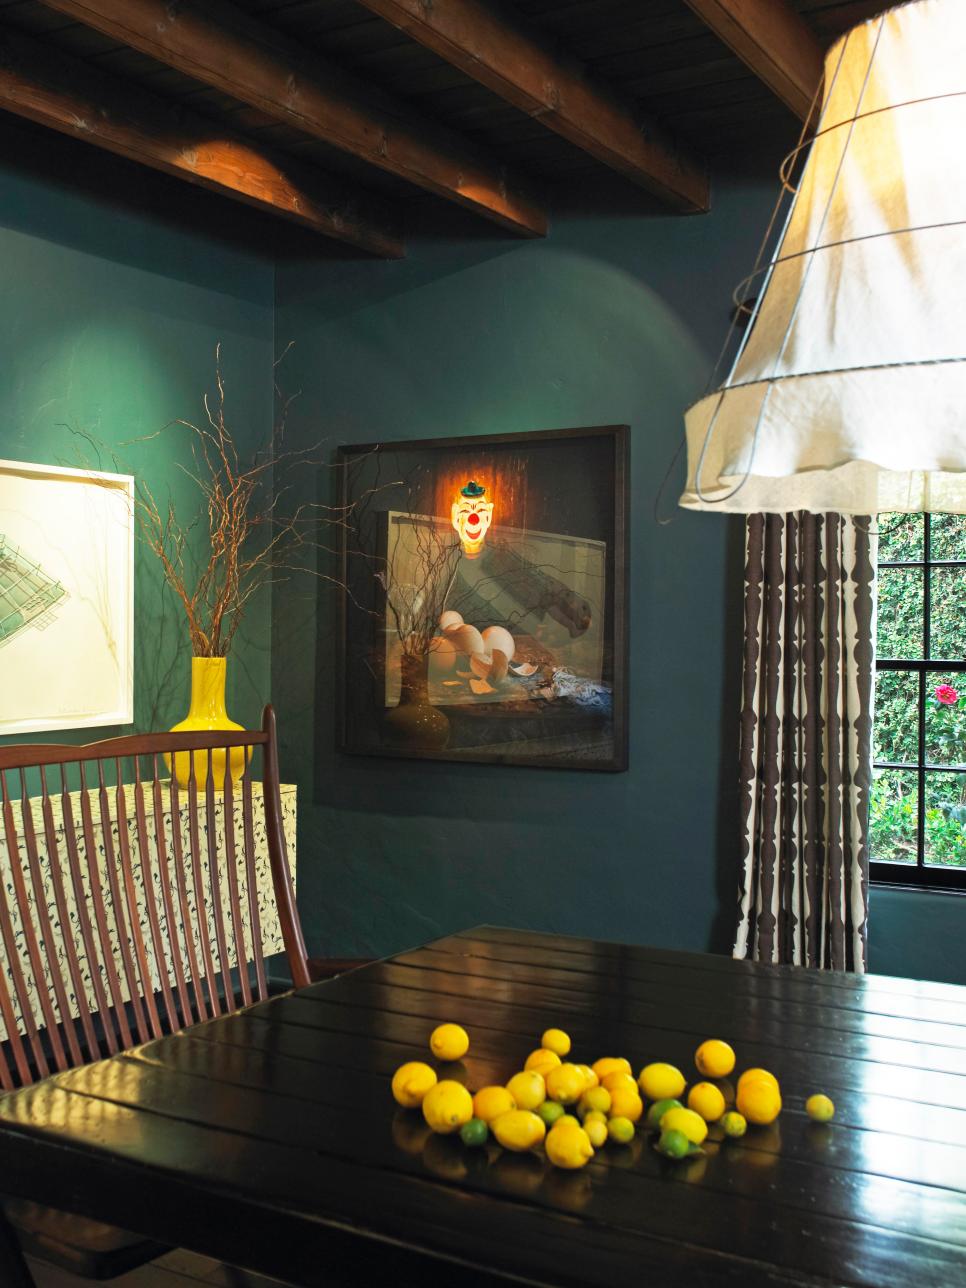 Dark Teal Blue Dining Room With Wood Beam Ceiling and Clown Art